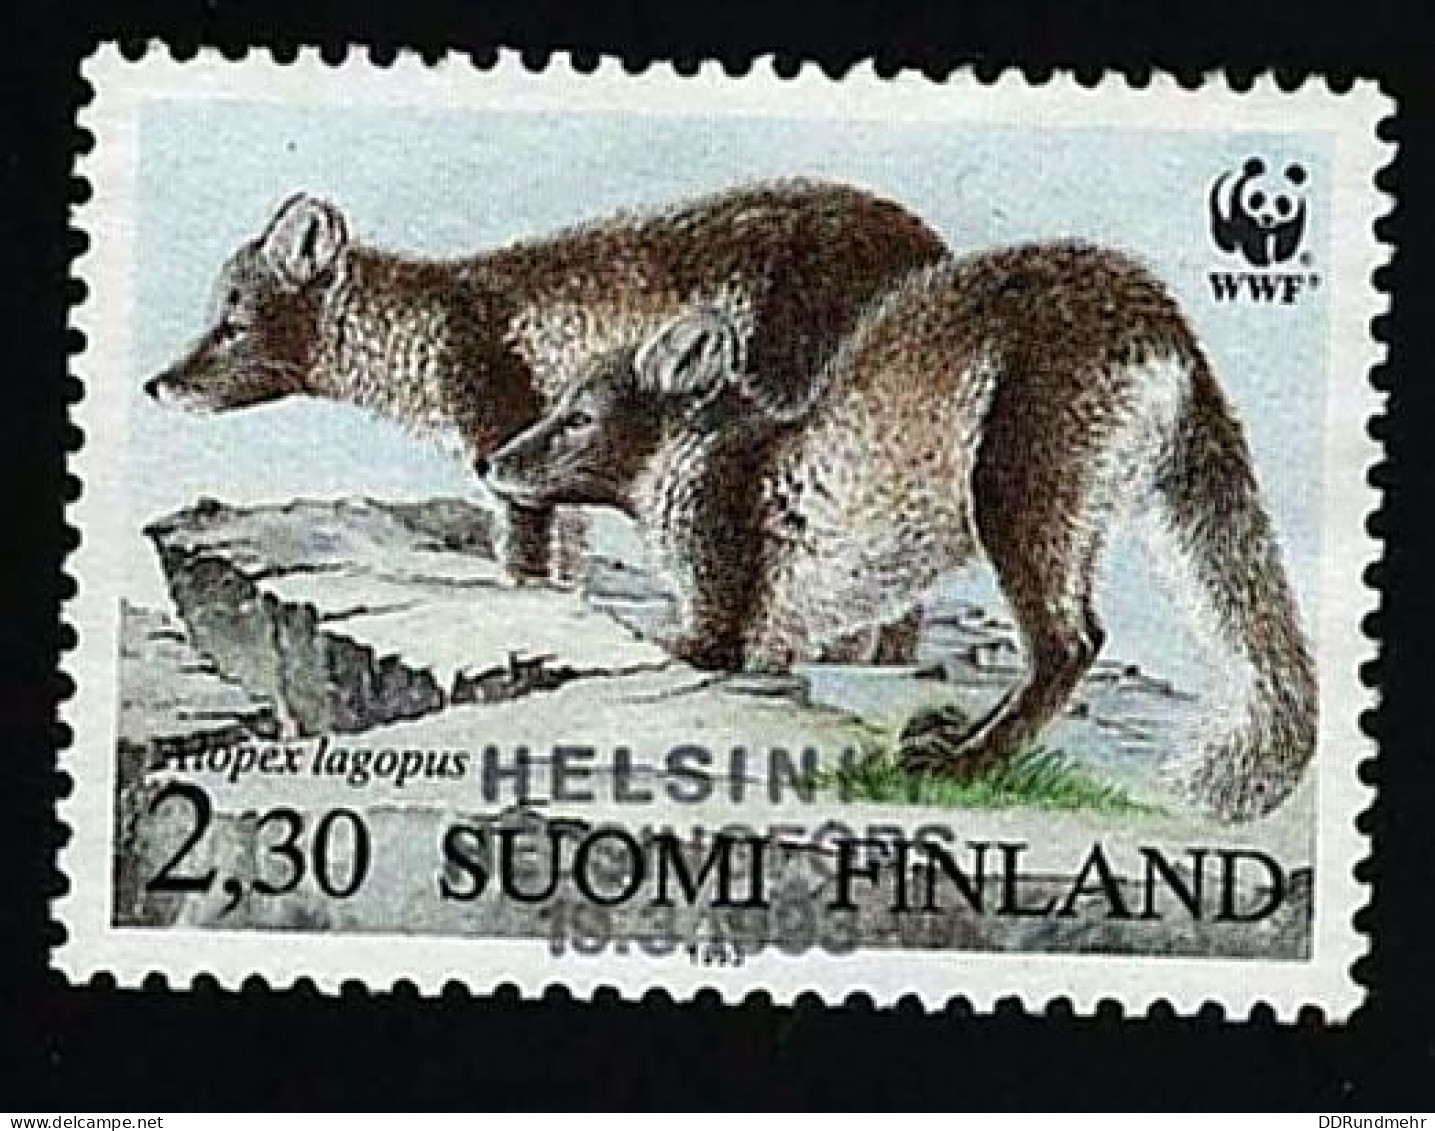 1993 Arctic Fox   Michel FI 1205 Stamp Number FI 907d Yvert Et Tellier FI 1169   First Day Stamp Used - Usados